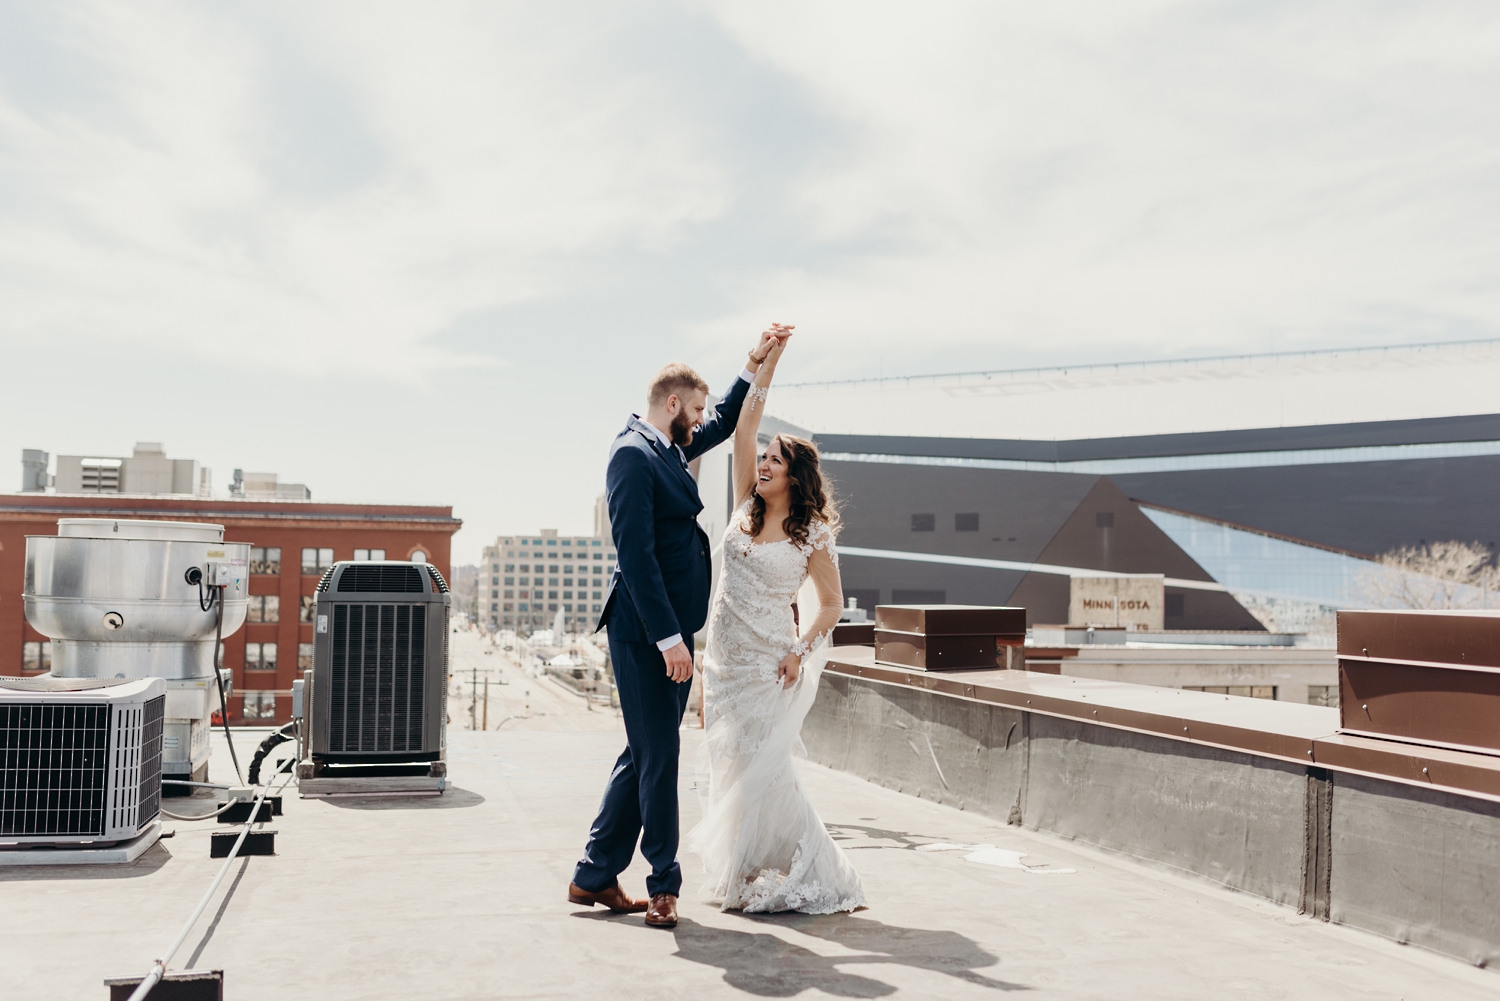 Relaxed wedding at the dayblock event center minneapolis minnesota tom thornton photography